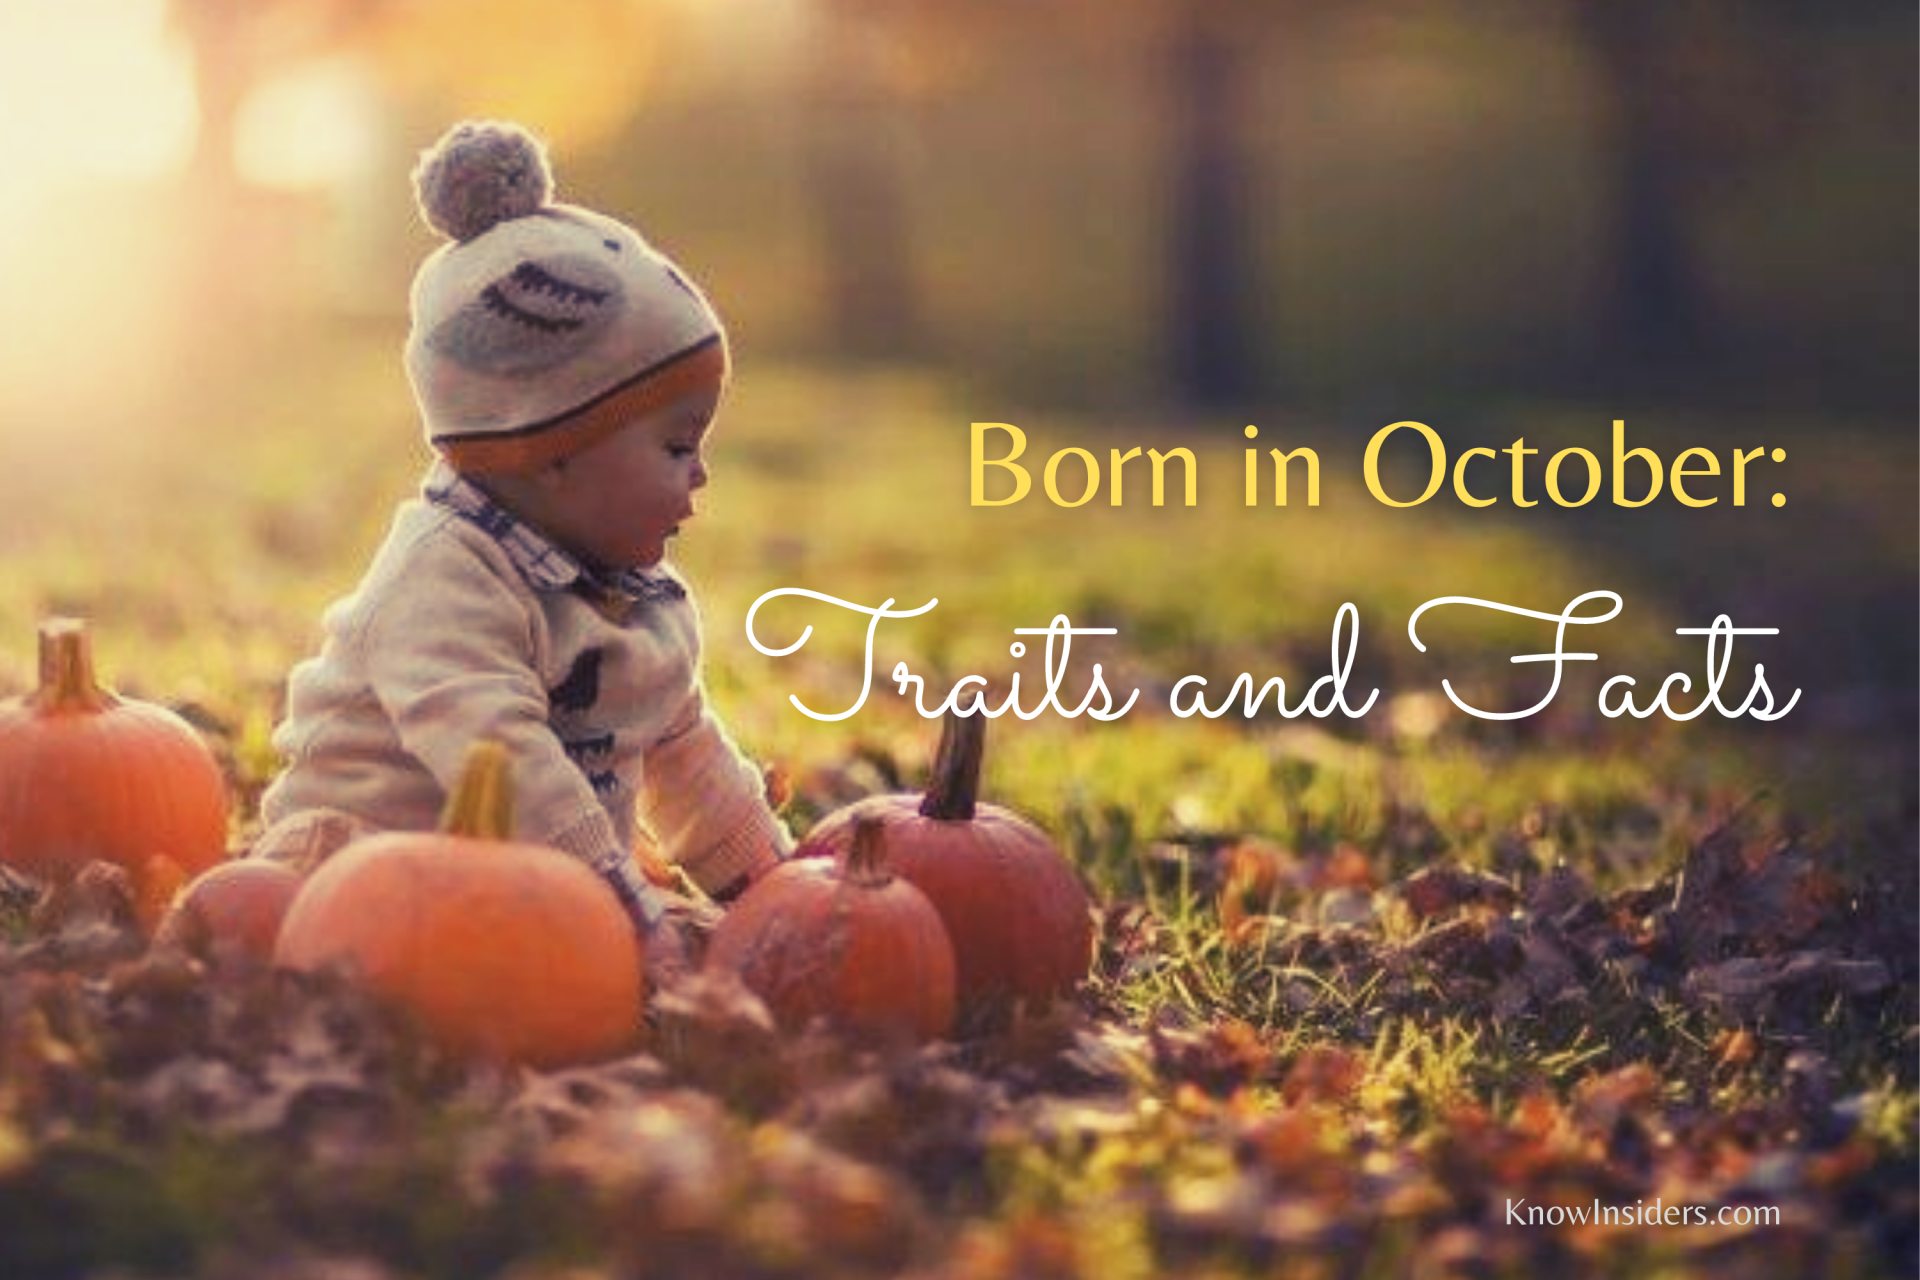 Born in October: Top 10 Interesting Facts and Characteristics